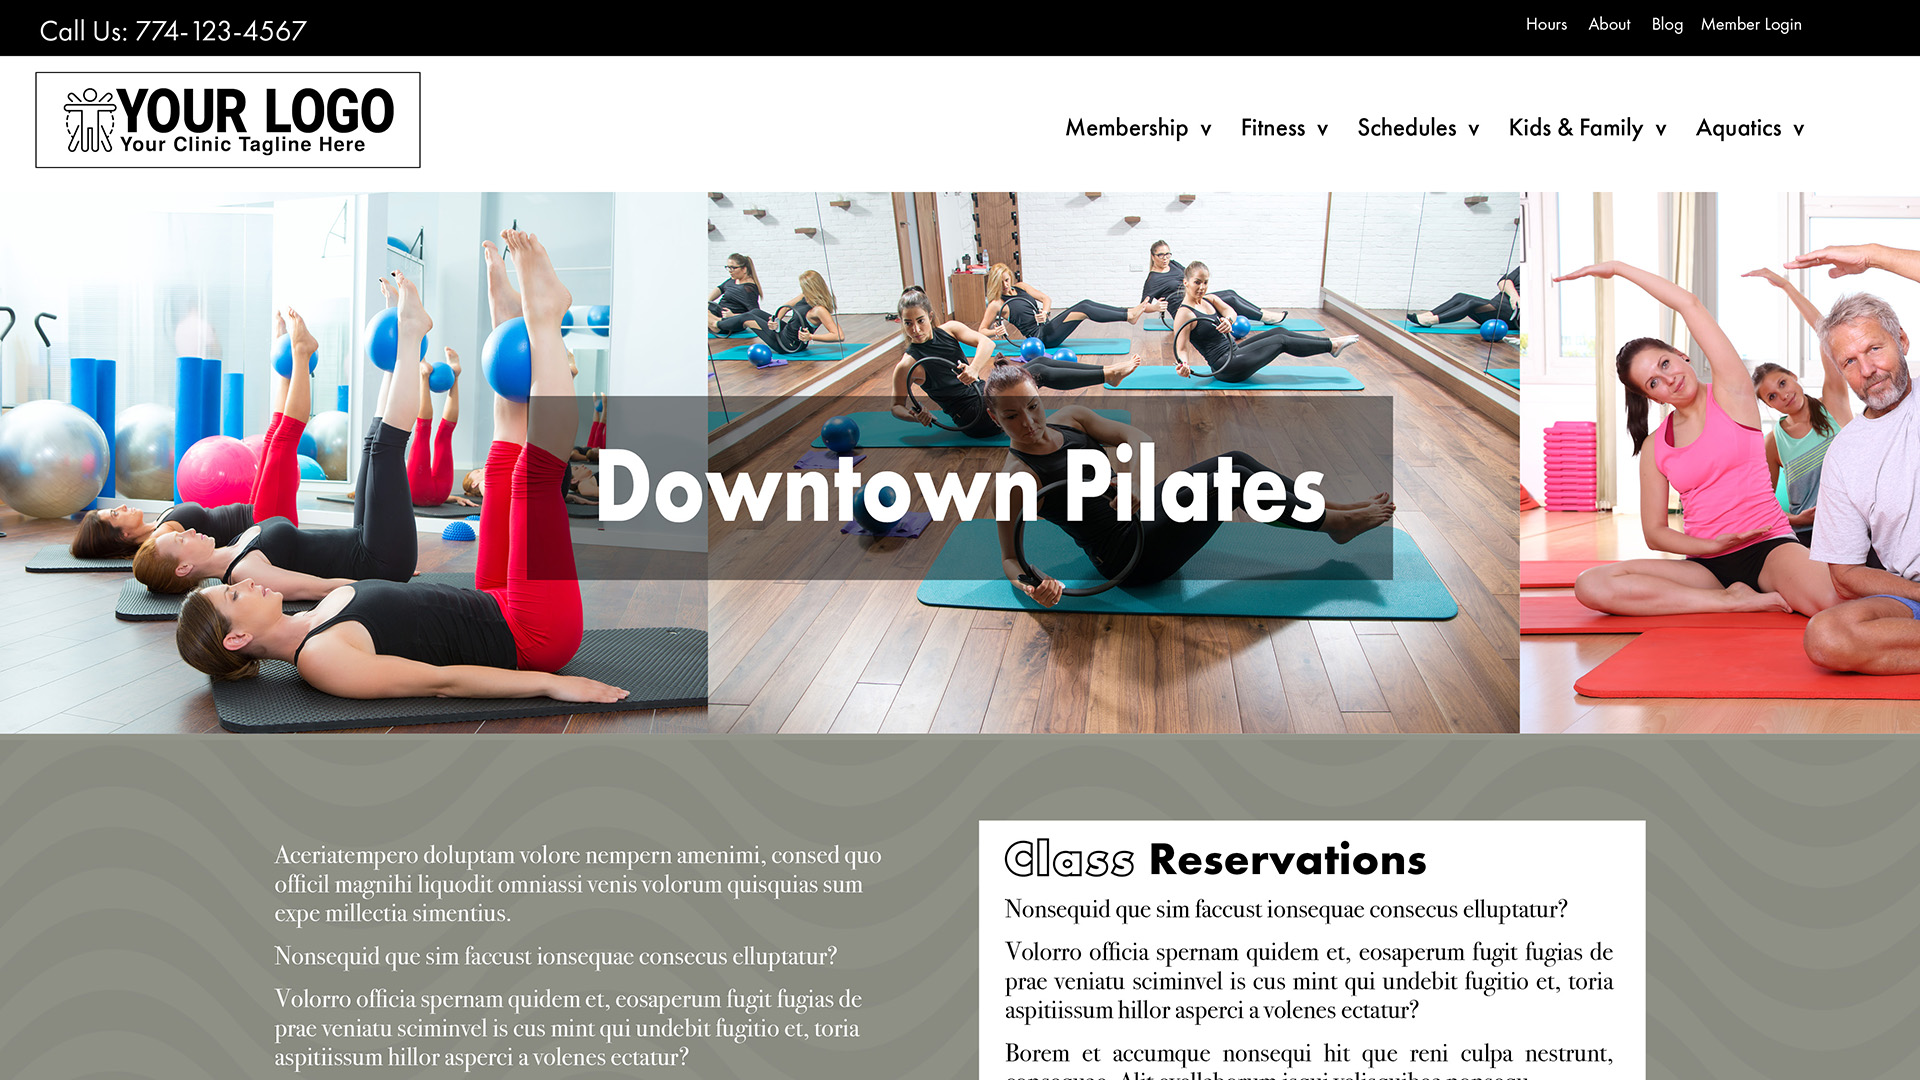 Custom Physical Therapy Website design sample for Pilates and Fitness | PT Referral Machine